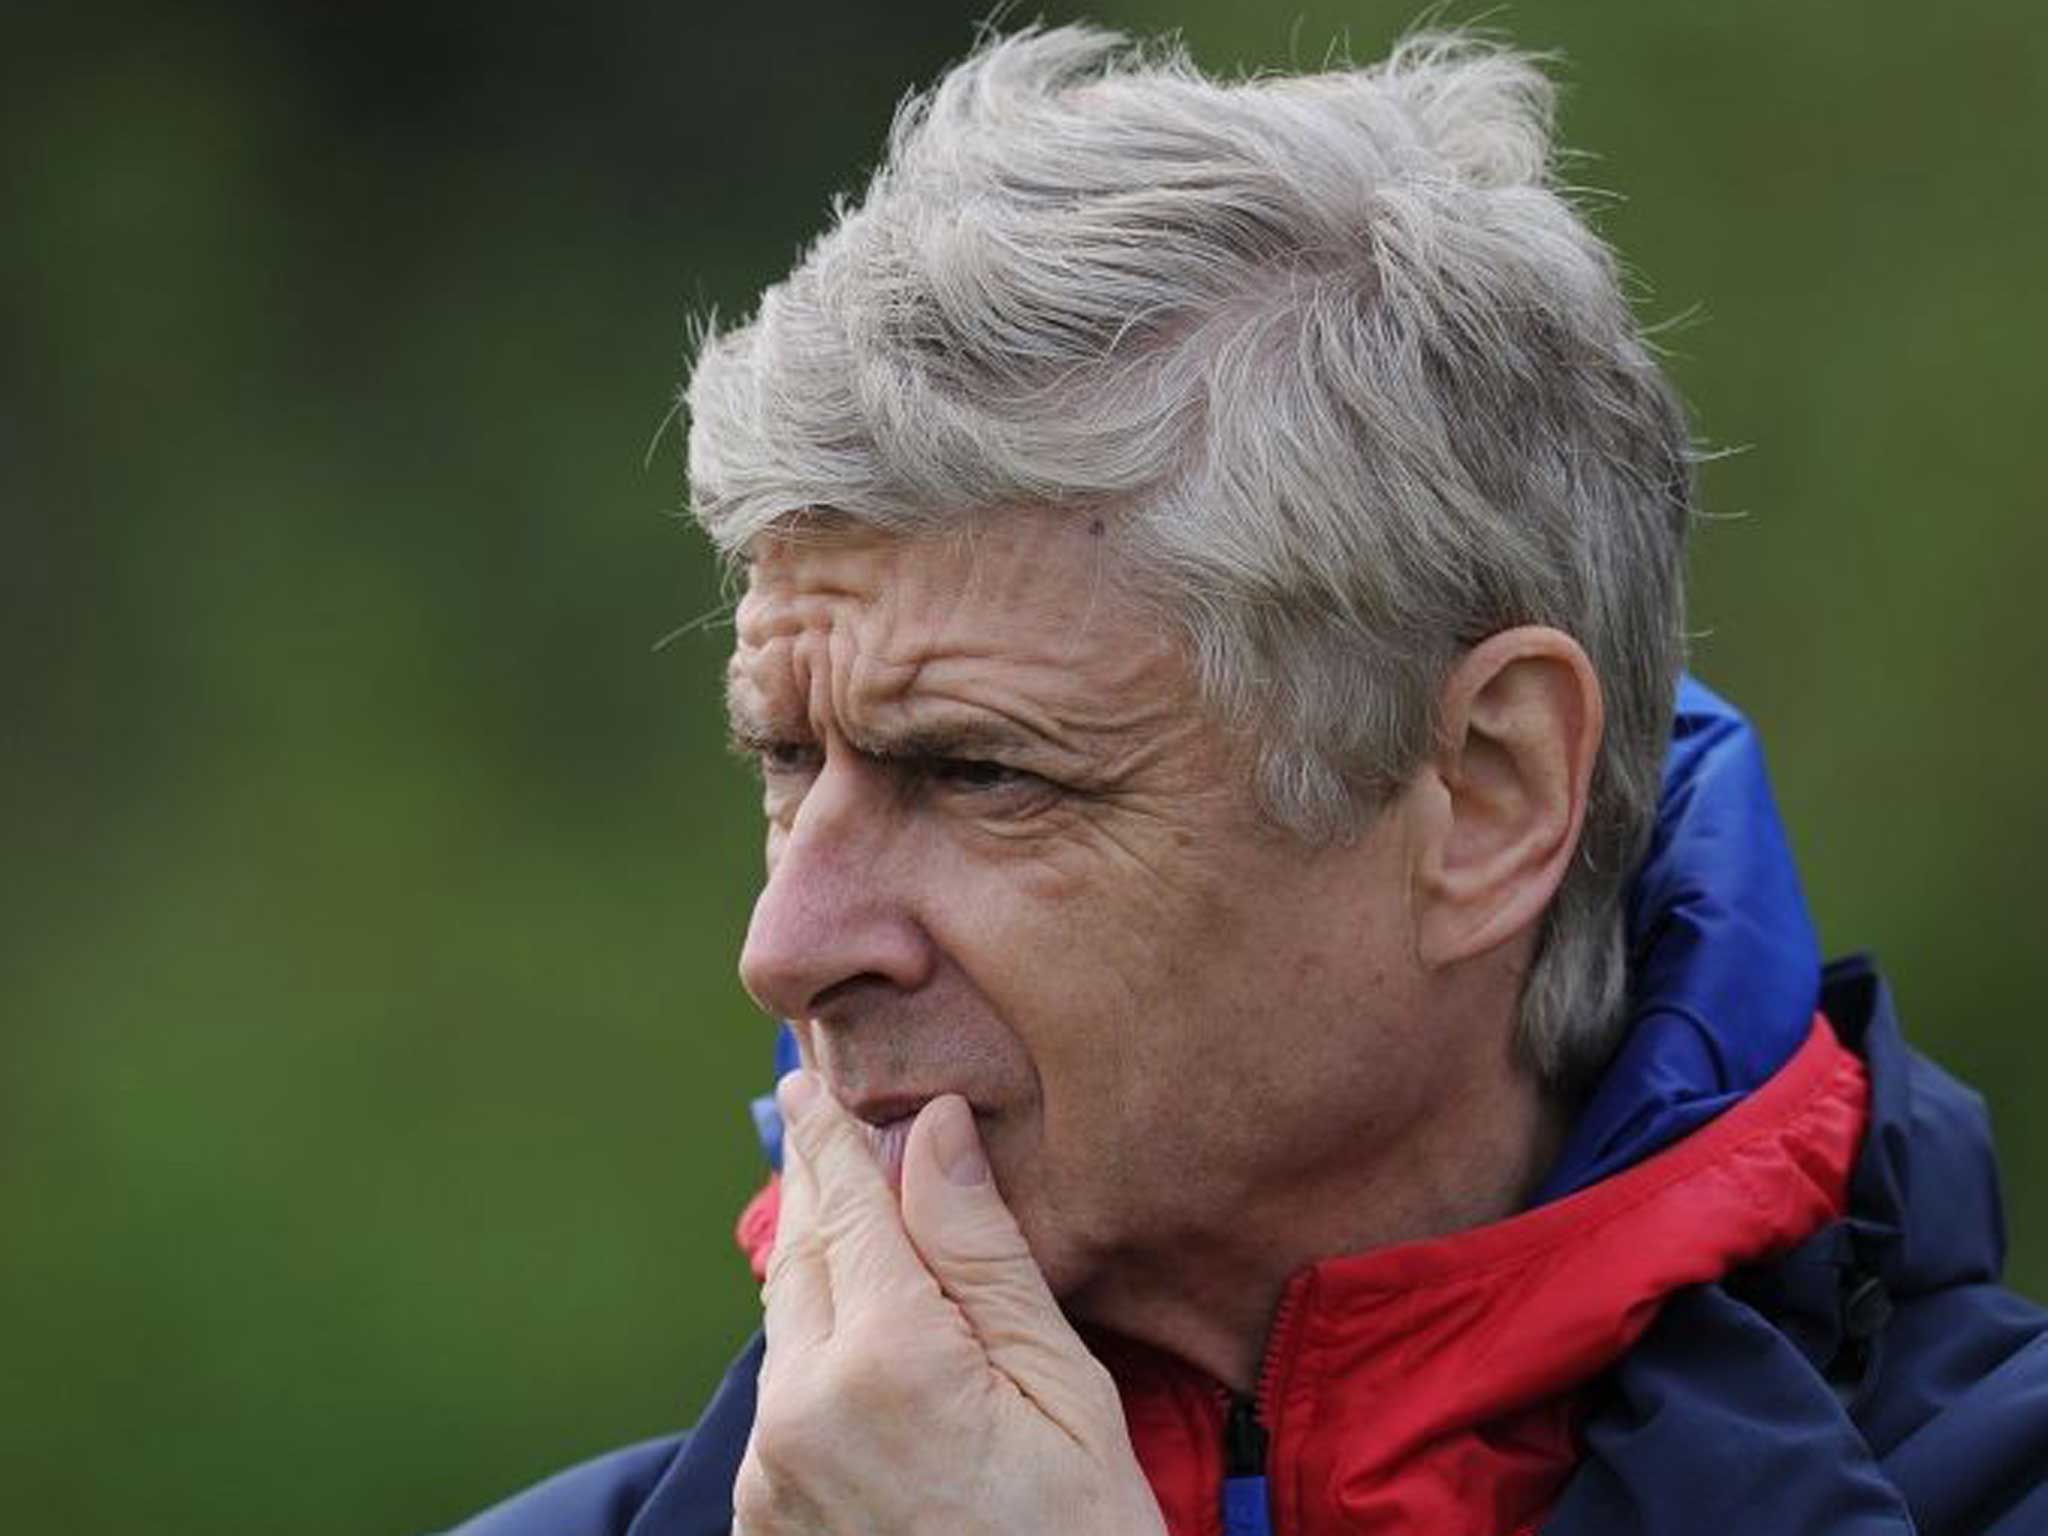 Wenger at a training session